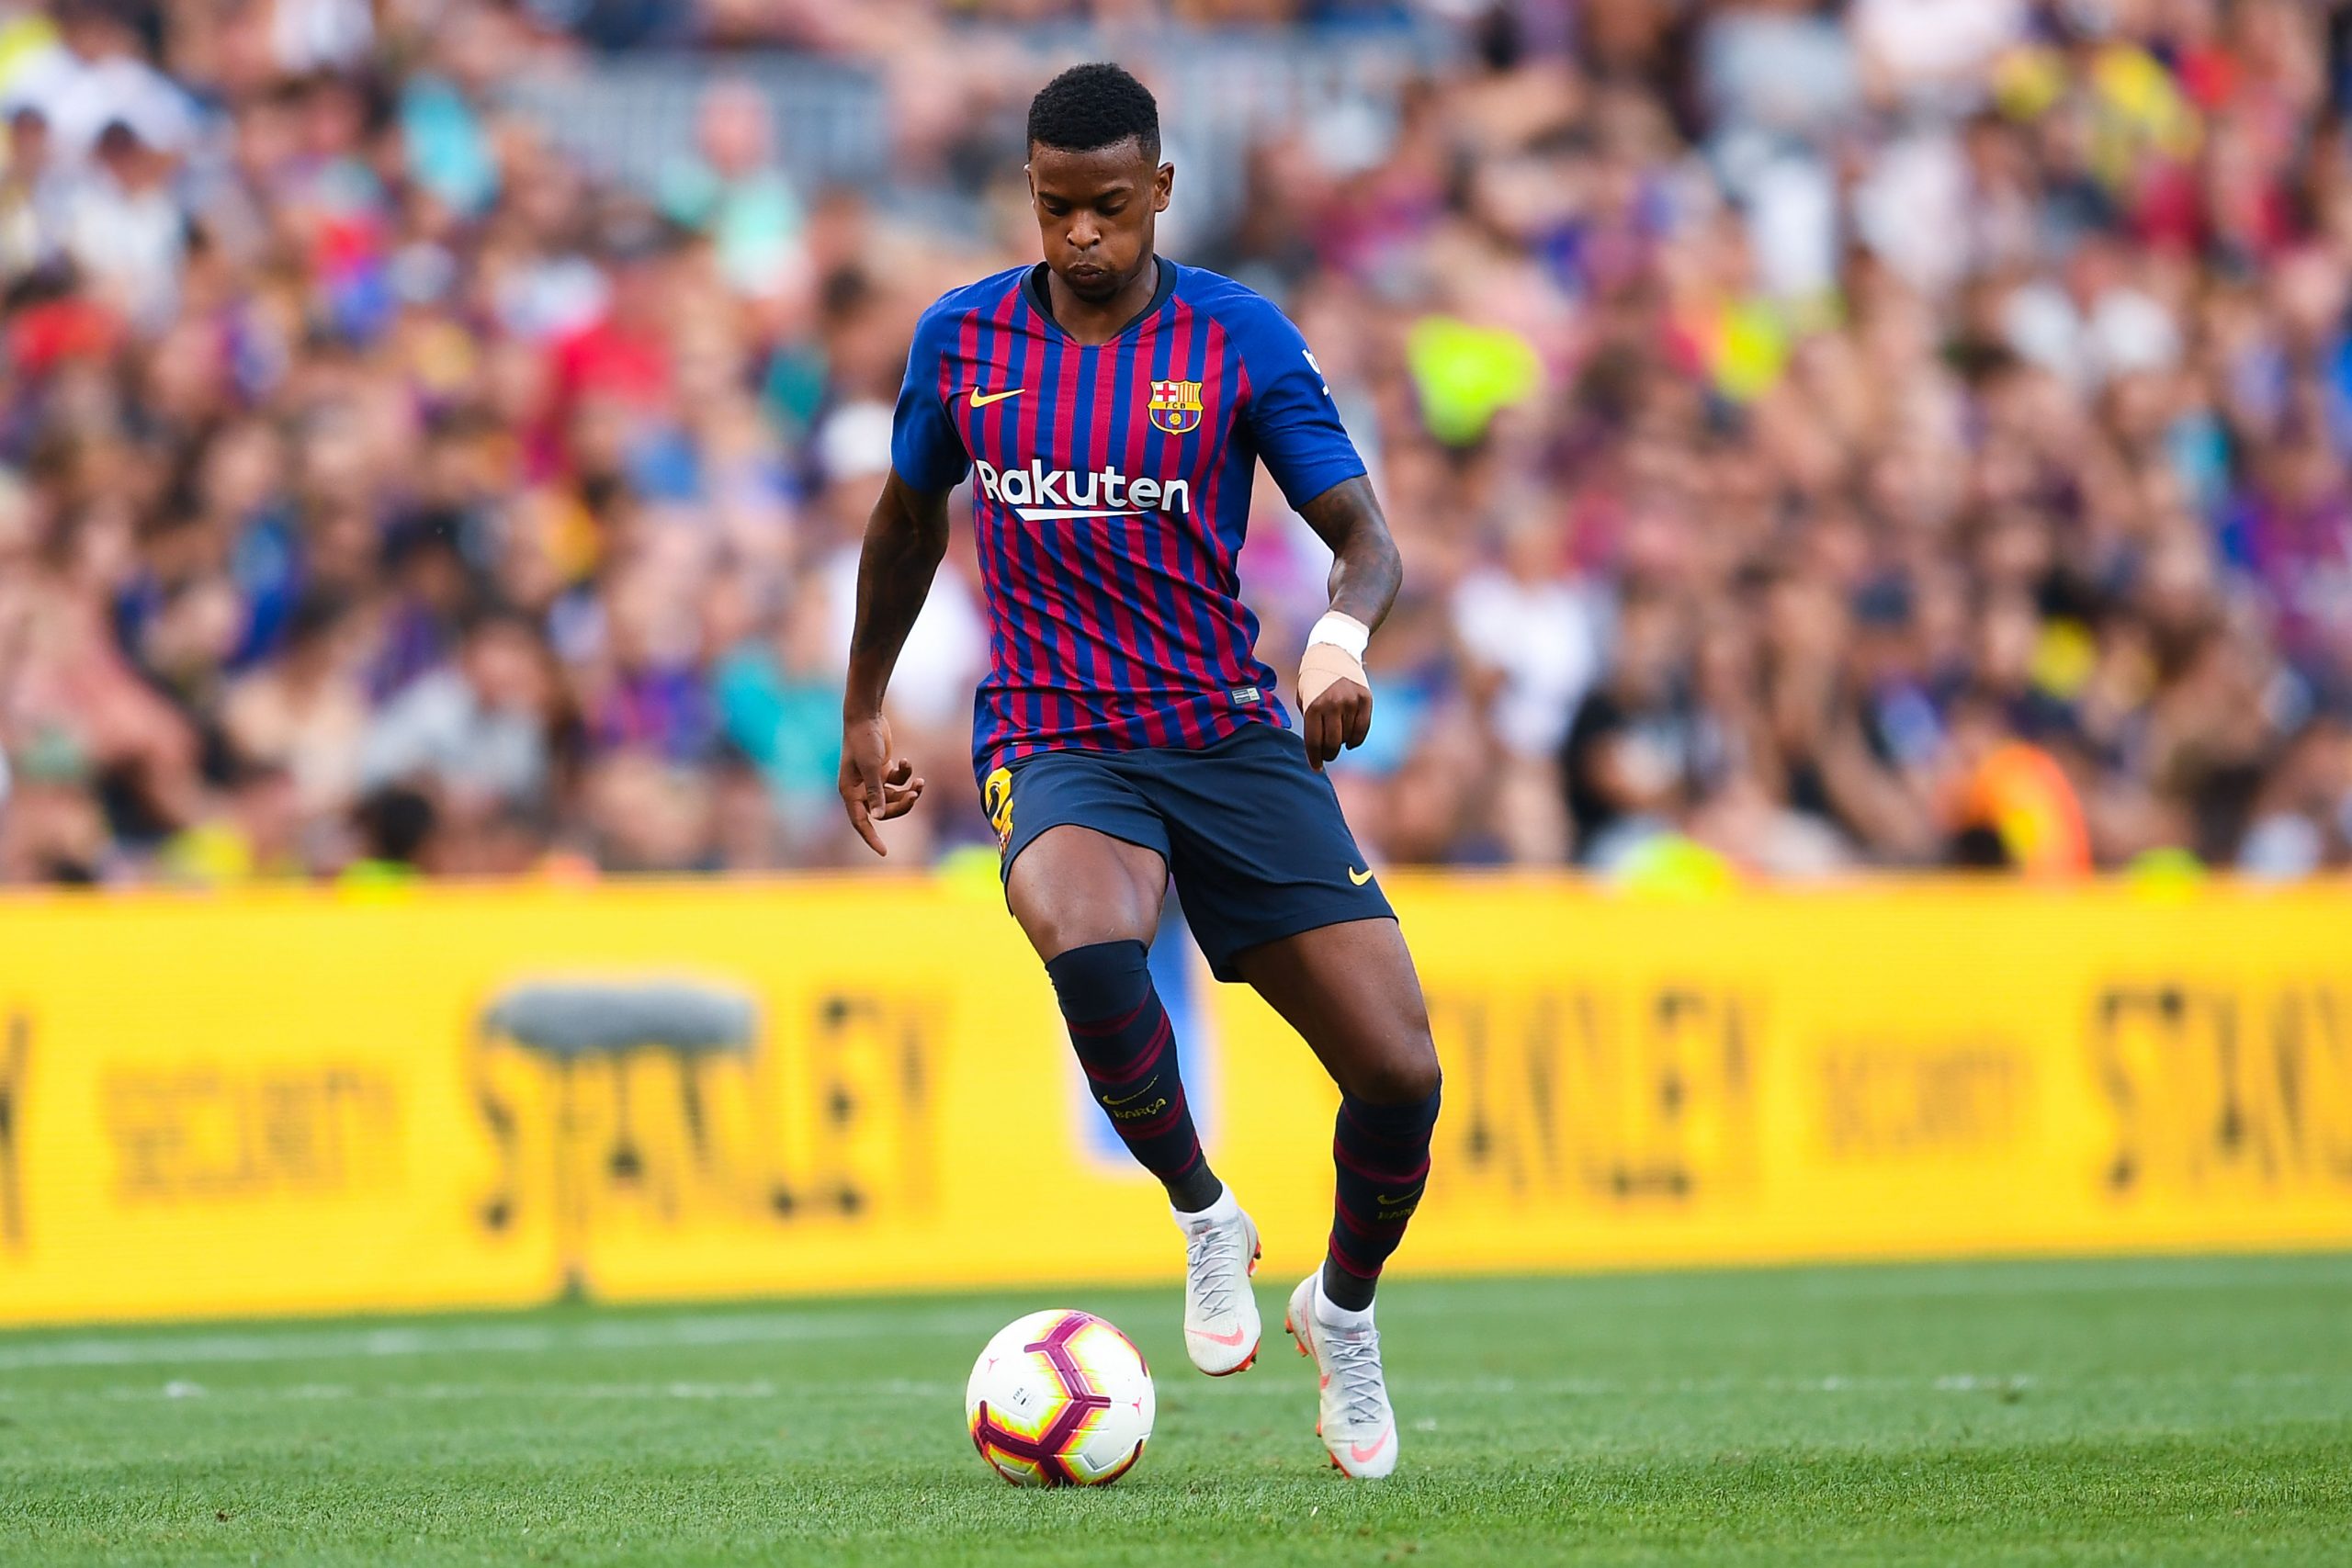 Manchester City set to enter 'final negotiations' for Semedo who is seen in the photo